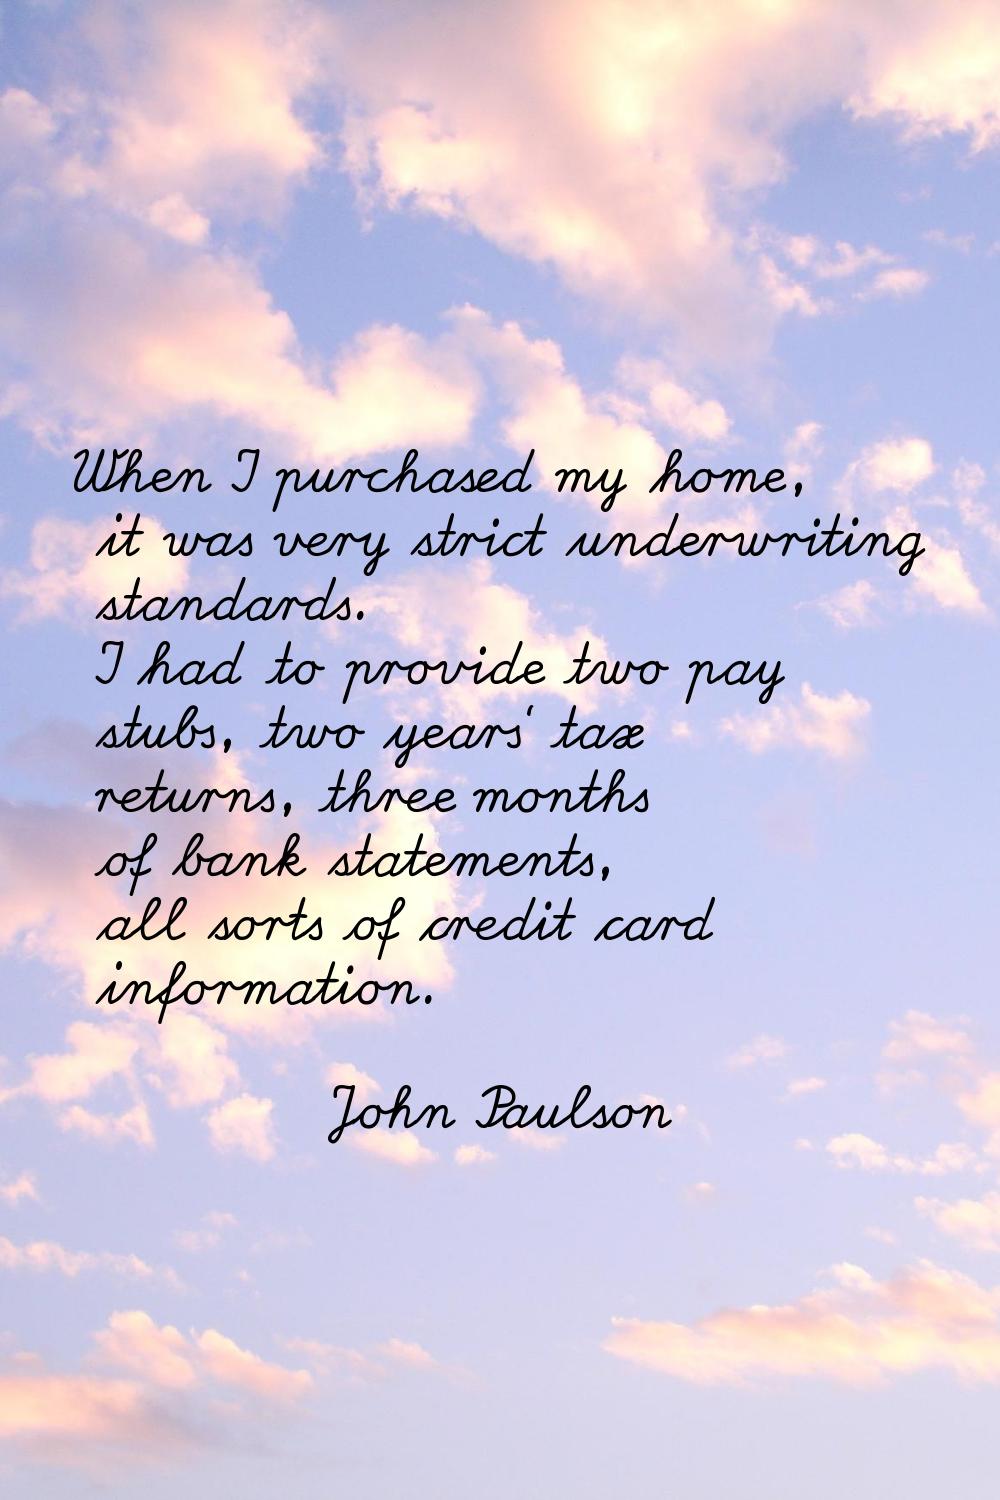 When I purchased my home, it was very strict underwriting standards. I had to provide two pay stubs